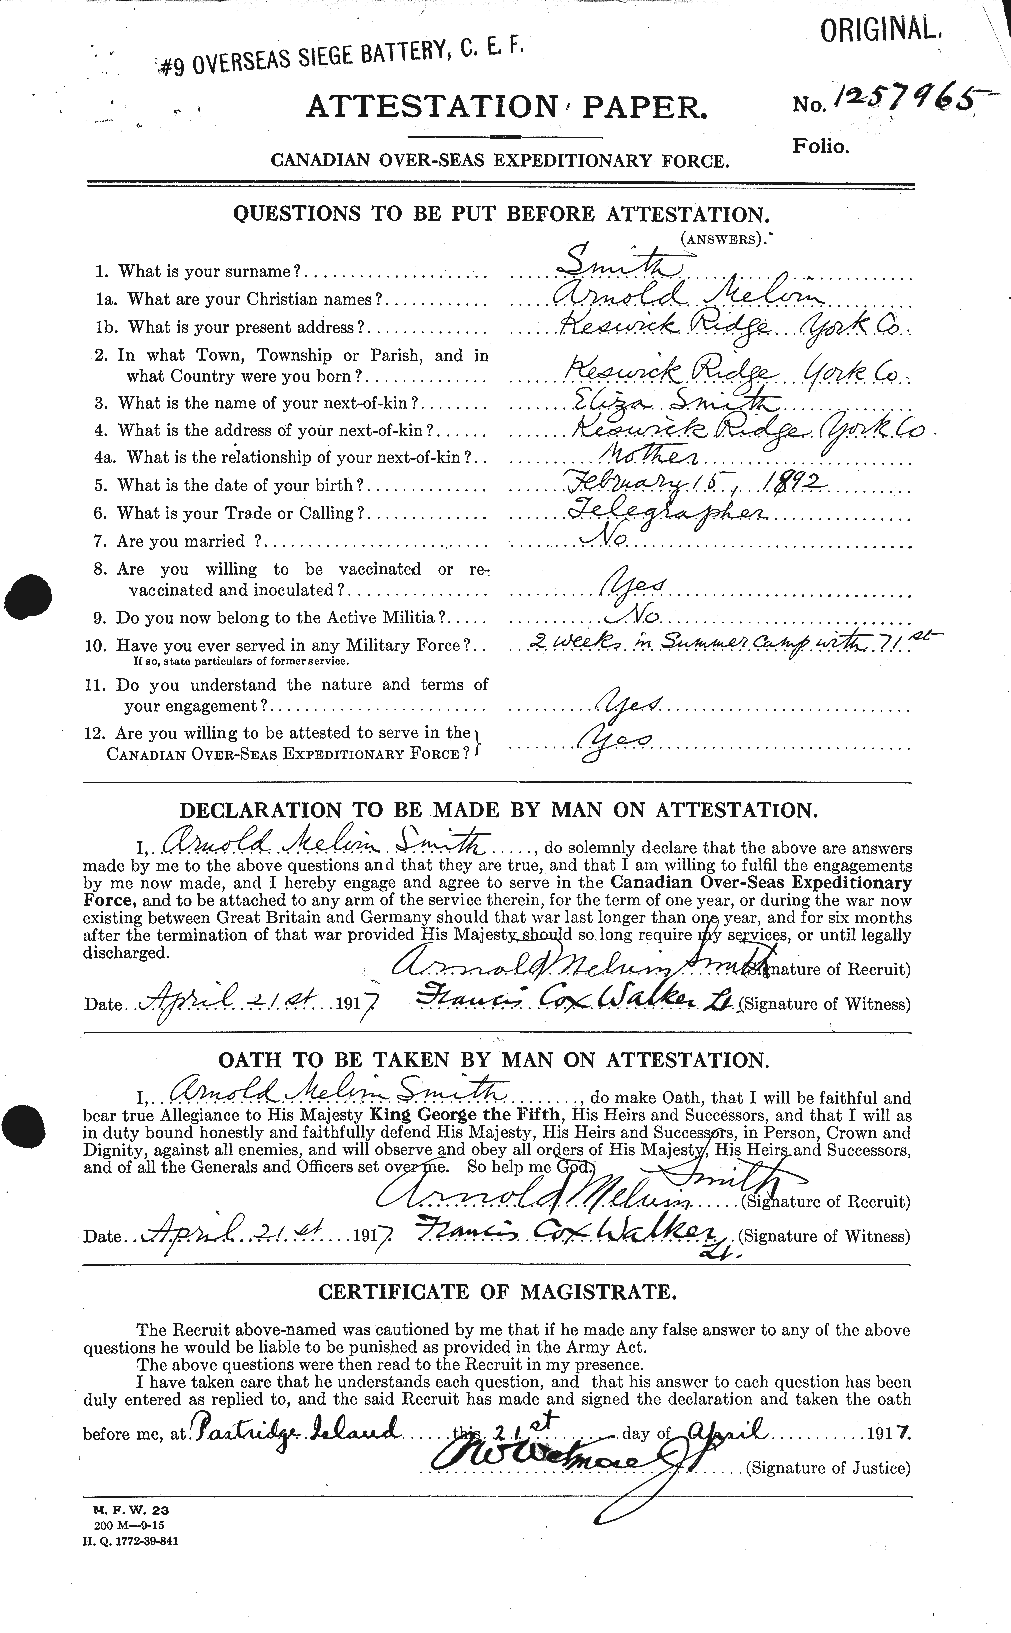 Personnel Records of the First World War - CEF 102193a